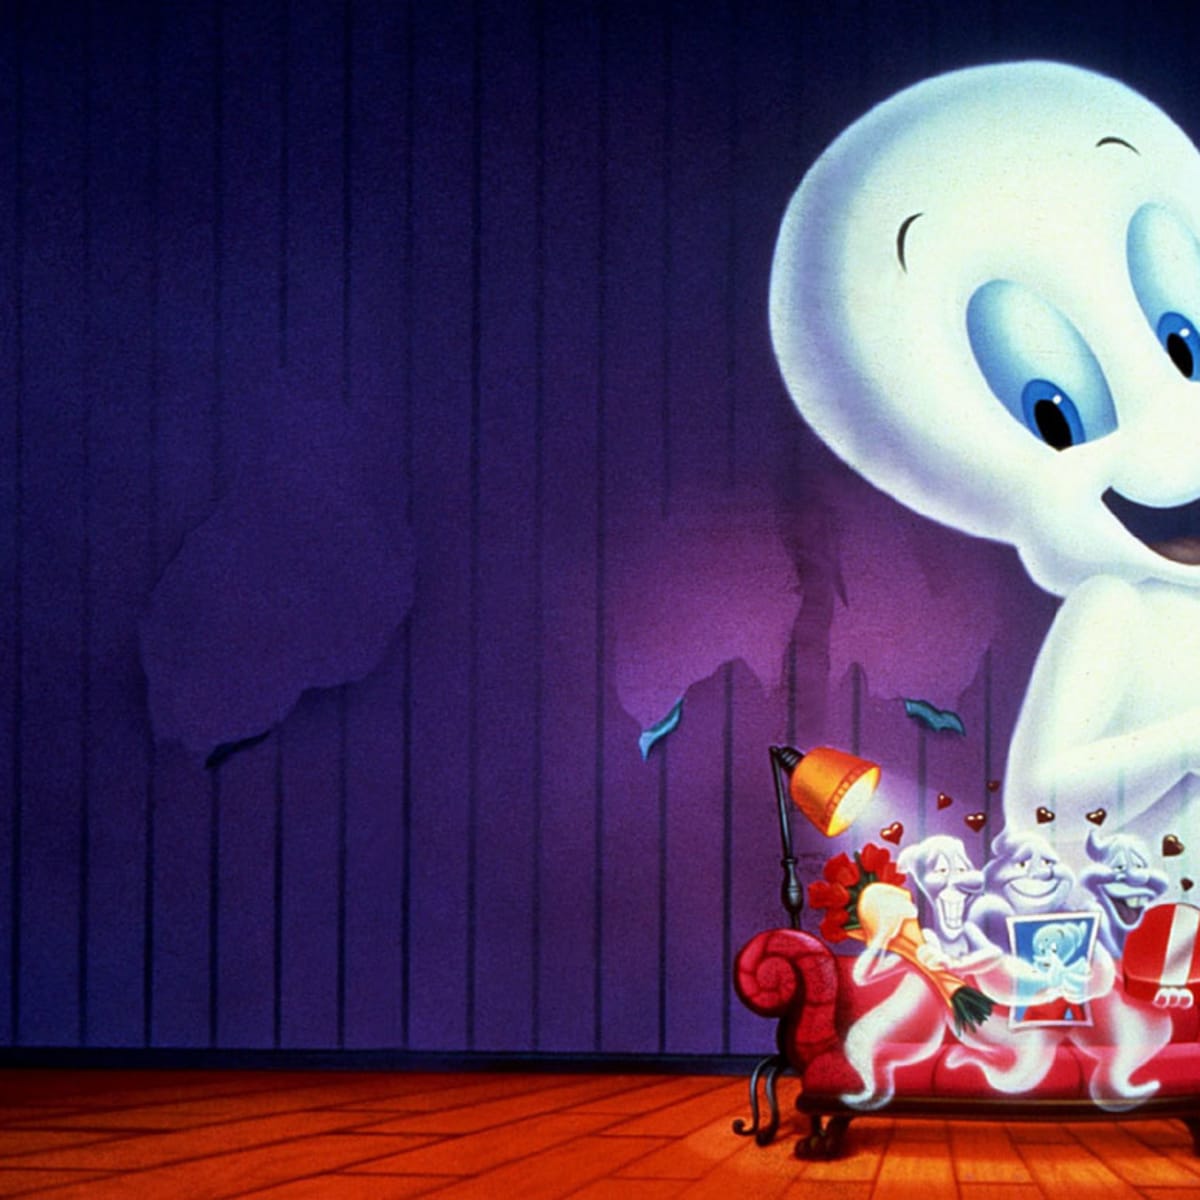 Names of America: Casper (The Friendly Ghost and Others): Entertainment, Recipes, Health, Life, Holidays